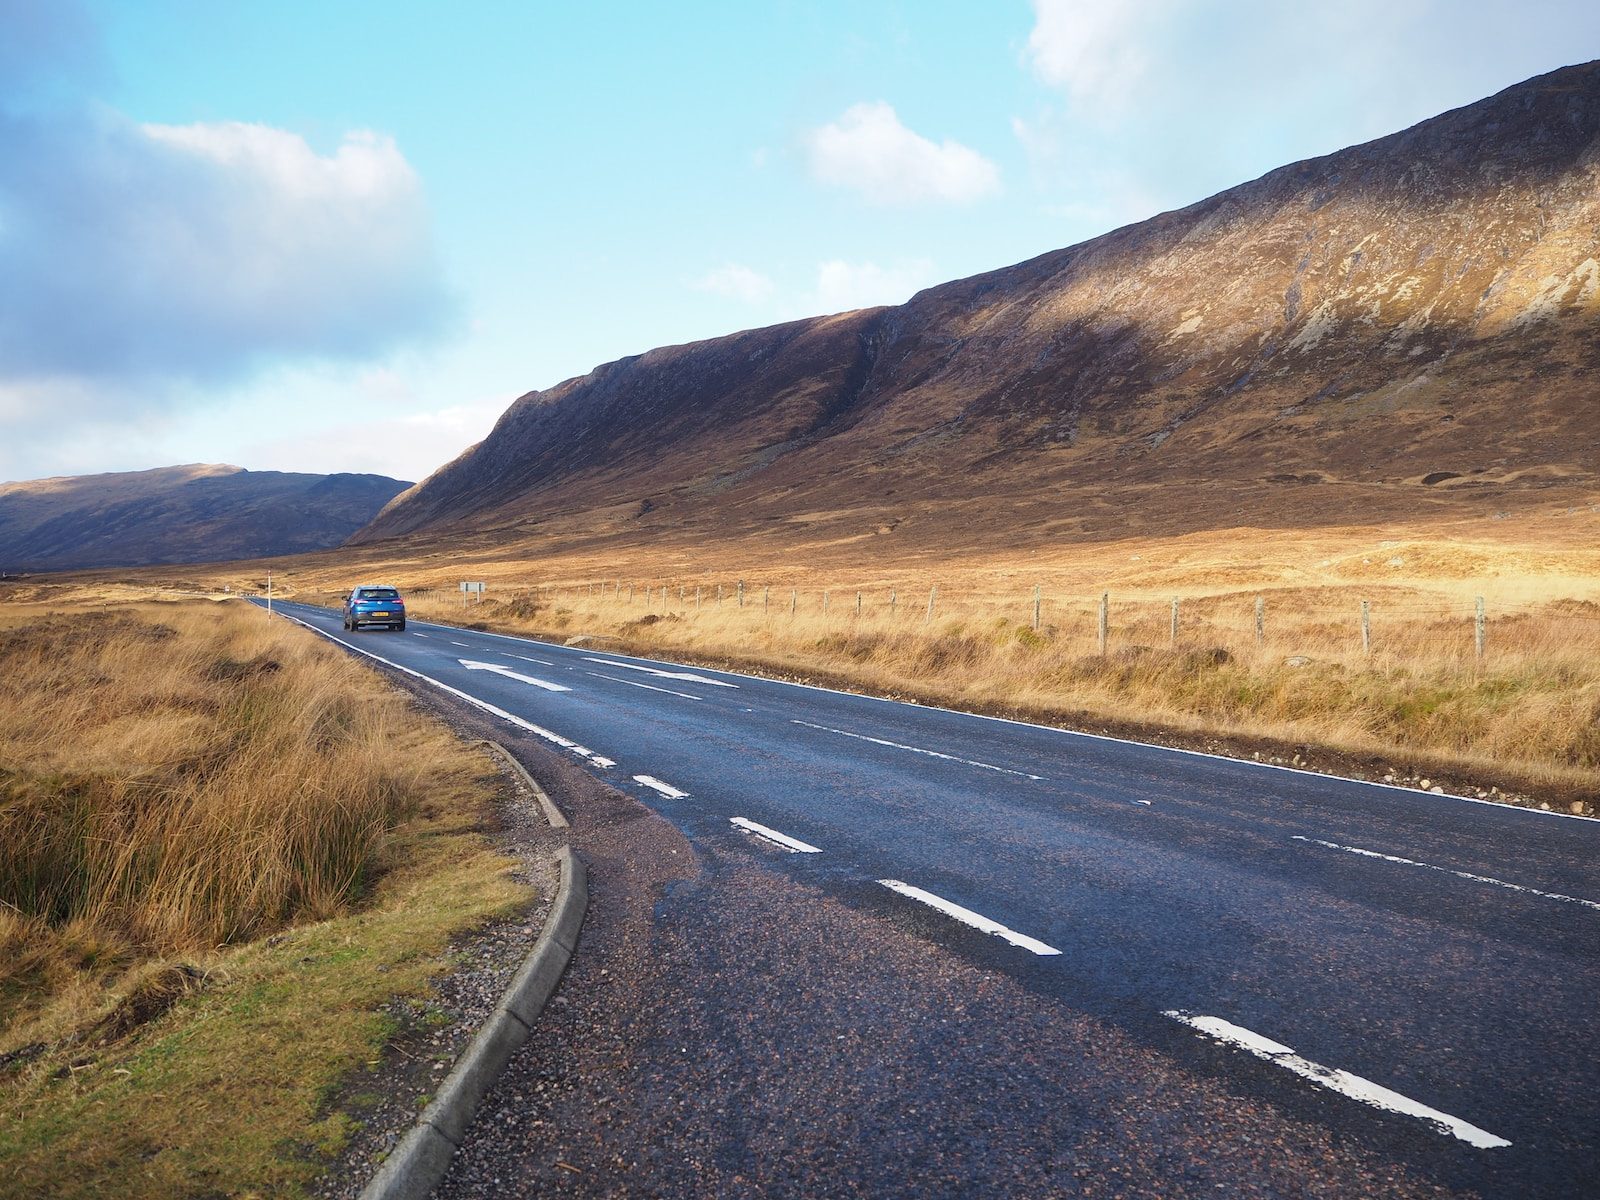 Strathclyde Windscreens: Your Trusted Partner for Windscreen Replacement and Repair in Scotland